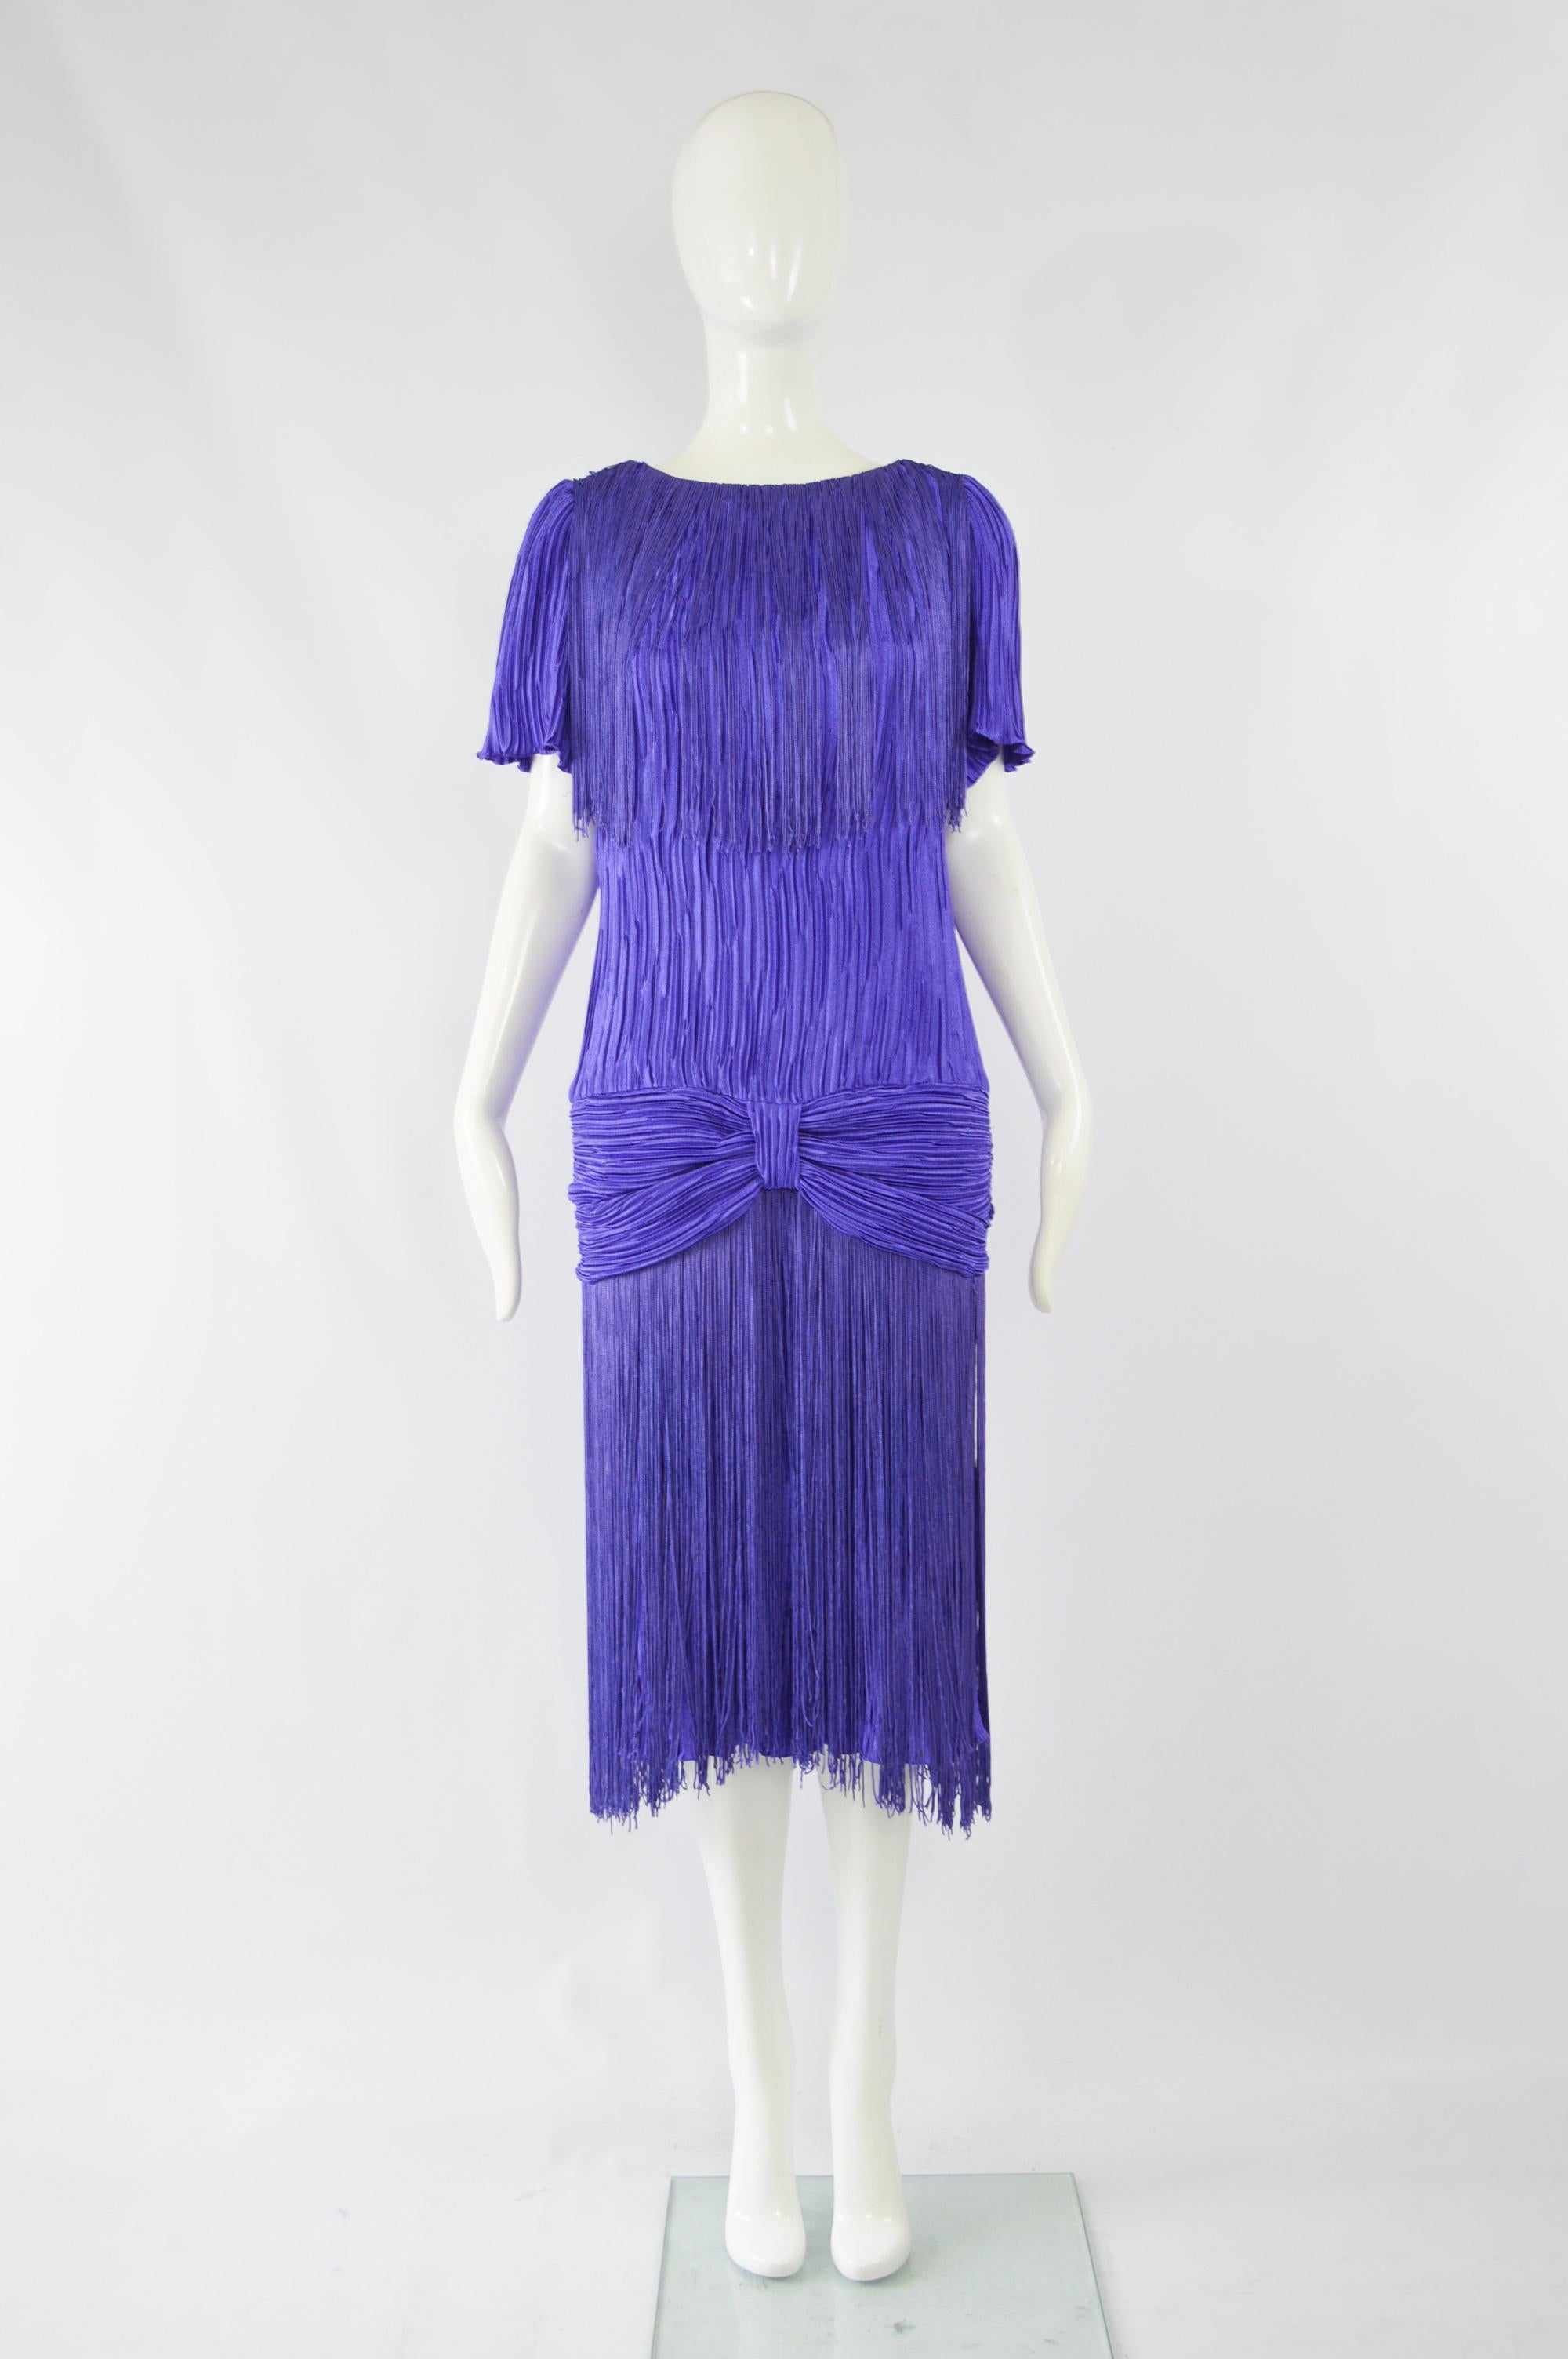 A fabulous vintage womens evening / party dress by high quality American label, Pat Richards. In a royal blue fortuny pleated fabric with a fringed hem and shoulders for a statement look.  

Size: Unlabelled; fits like a UK 14/ US 10/ EU 42. Please